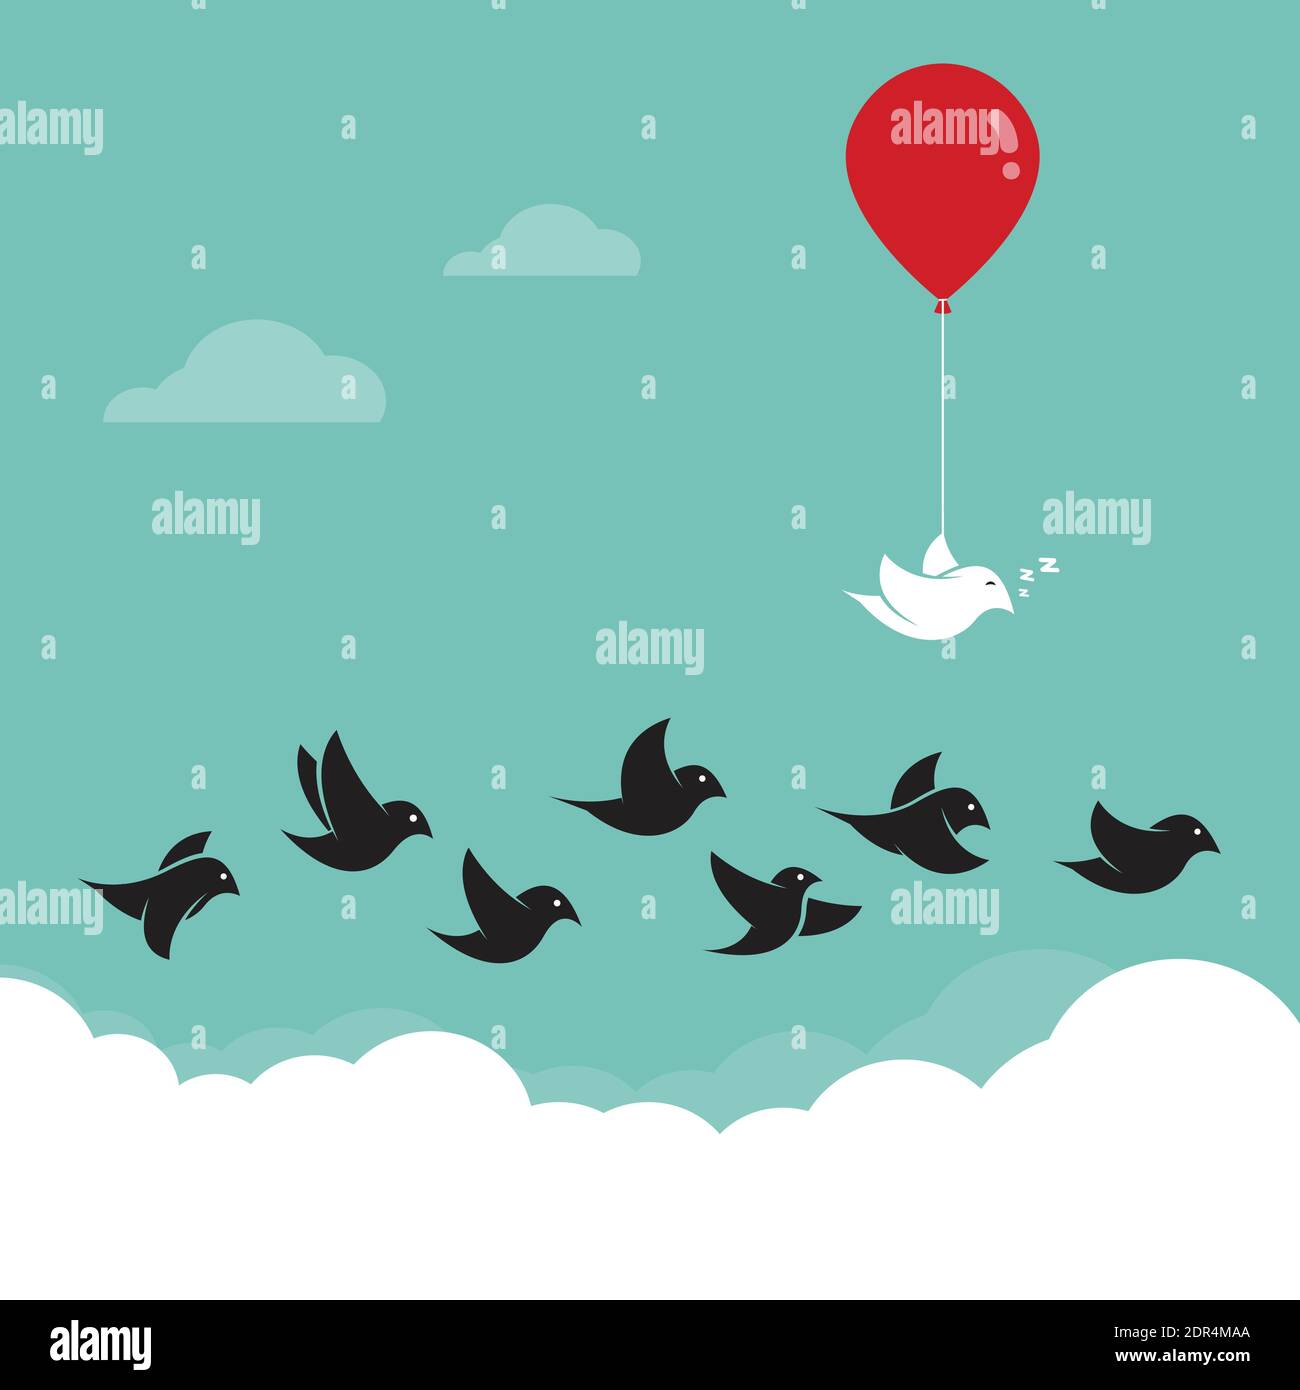 Birds flying in the sky and red balloons. Concept creative. Easy editable layered vector illustration. Stock Vector